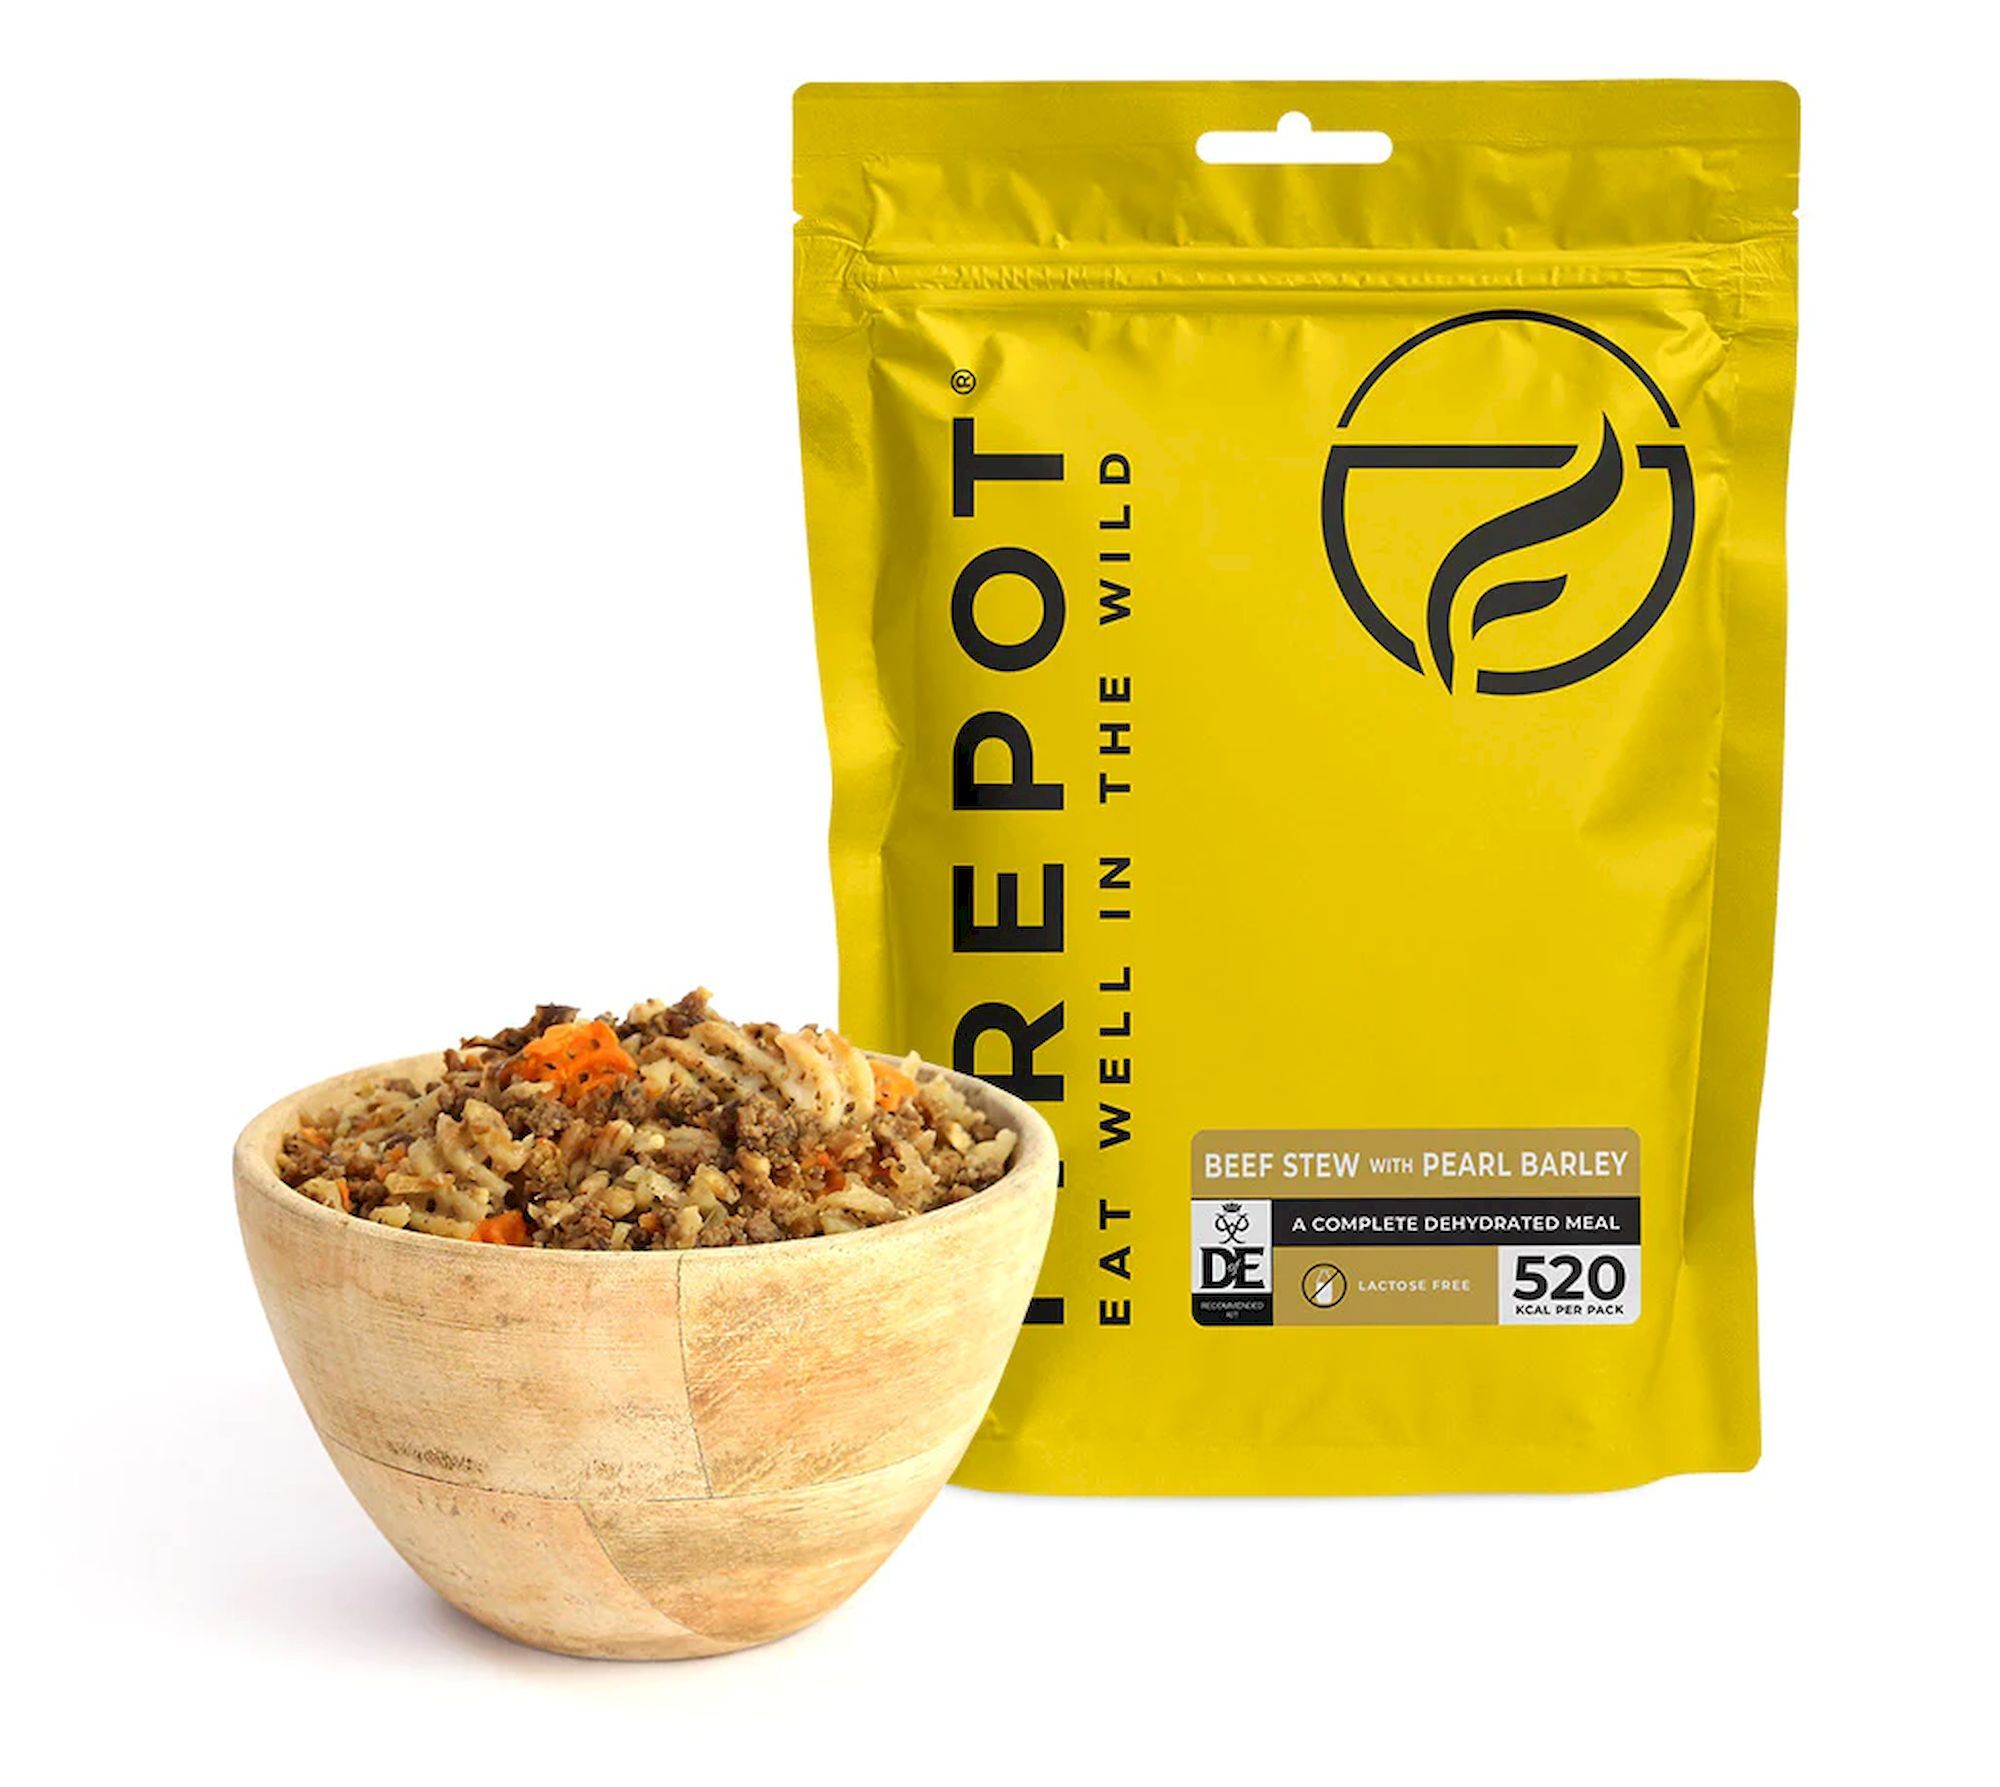 Firepot Beef Stew with Pearl Barley - Freeze-dried meals | Hardloop